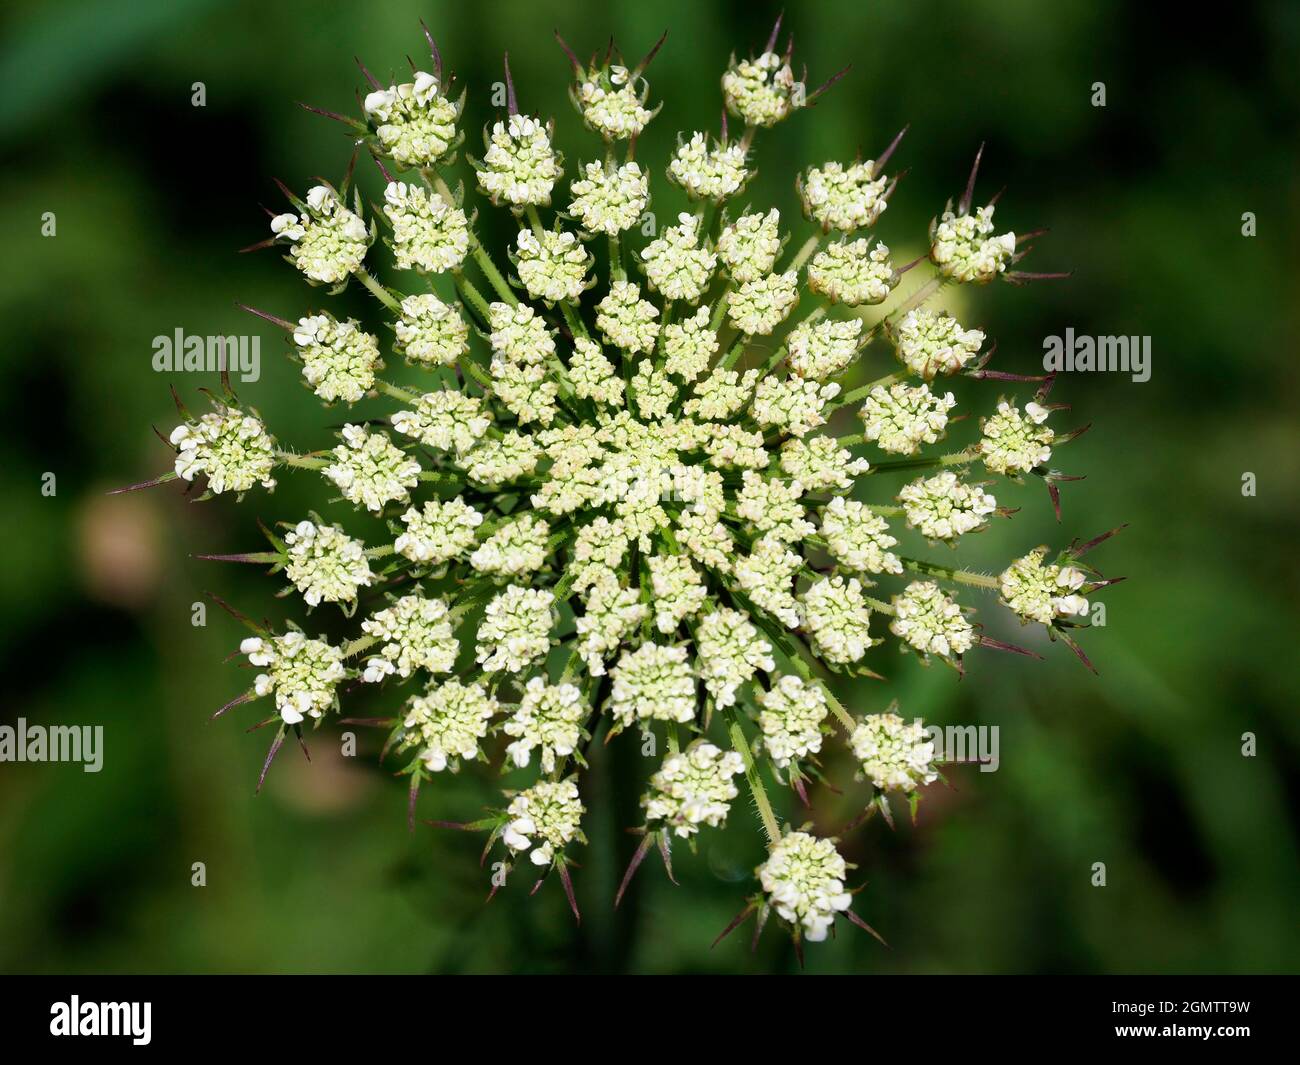 River Thames, Oxfordshire, England - 16 July 2019      Anthriscus sylvestris, known as cow parsley is a herbaceous biennial or short-lived perennial p Stock Photo